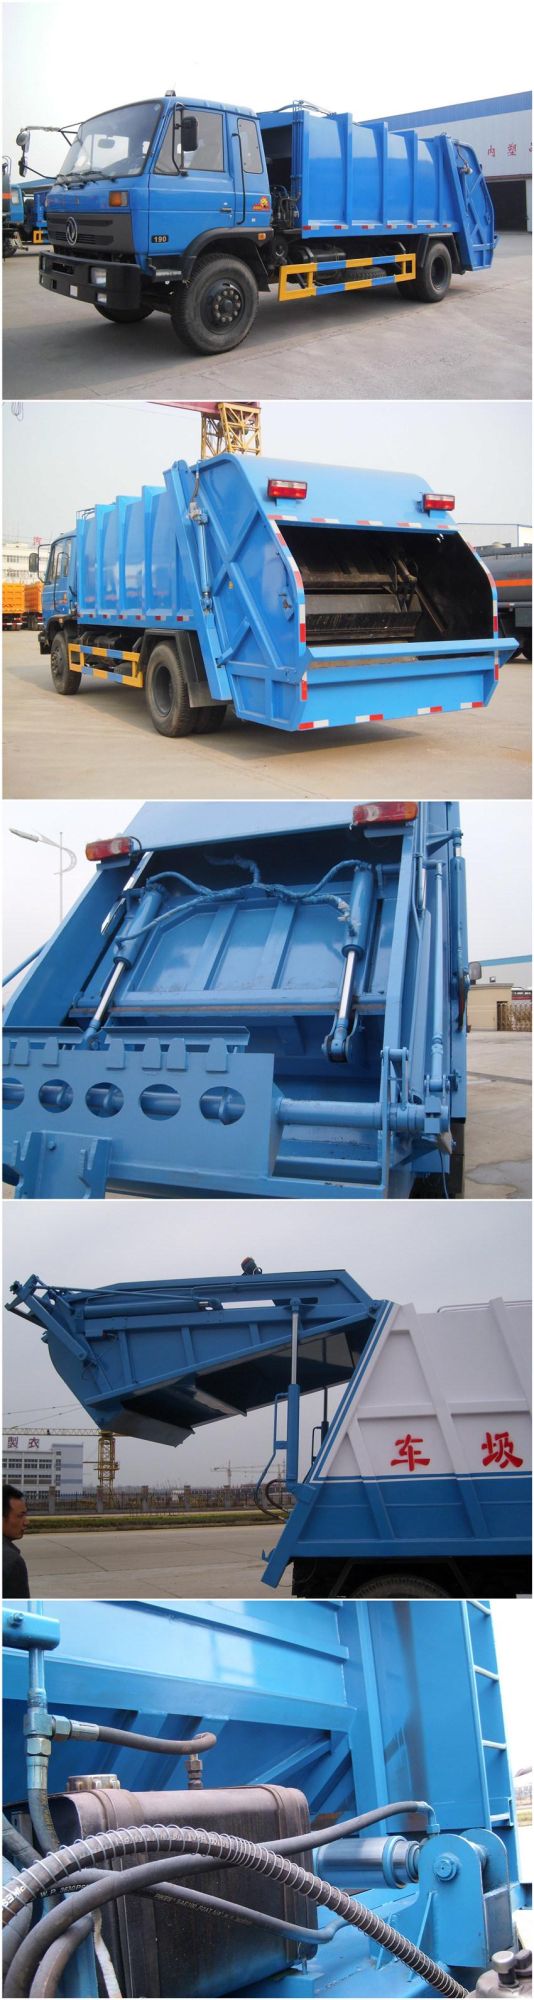 HOWO 4X2 10 Ton Rear Loader Waste Compactor Garbage Truck